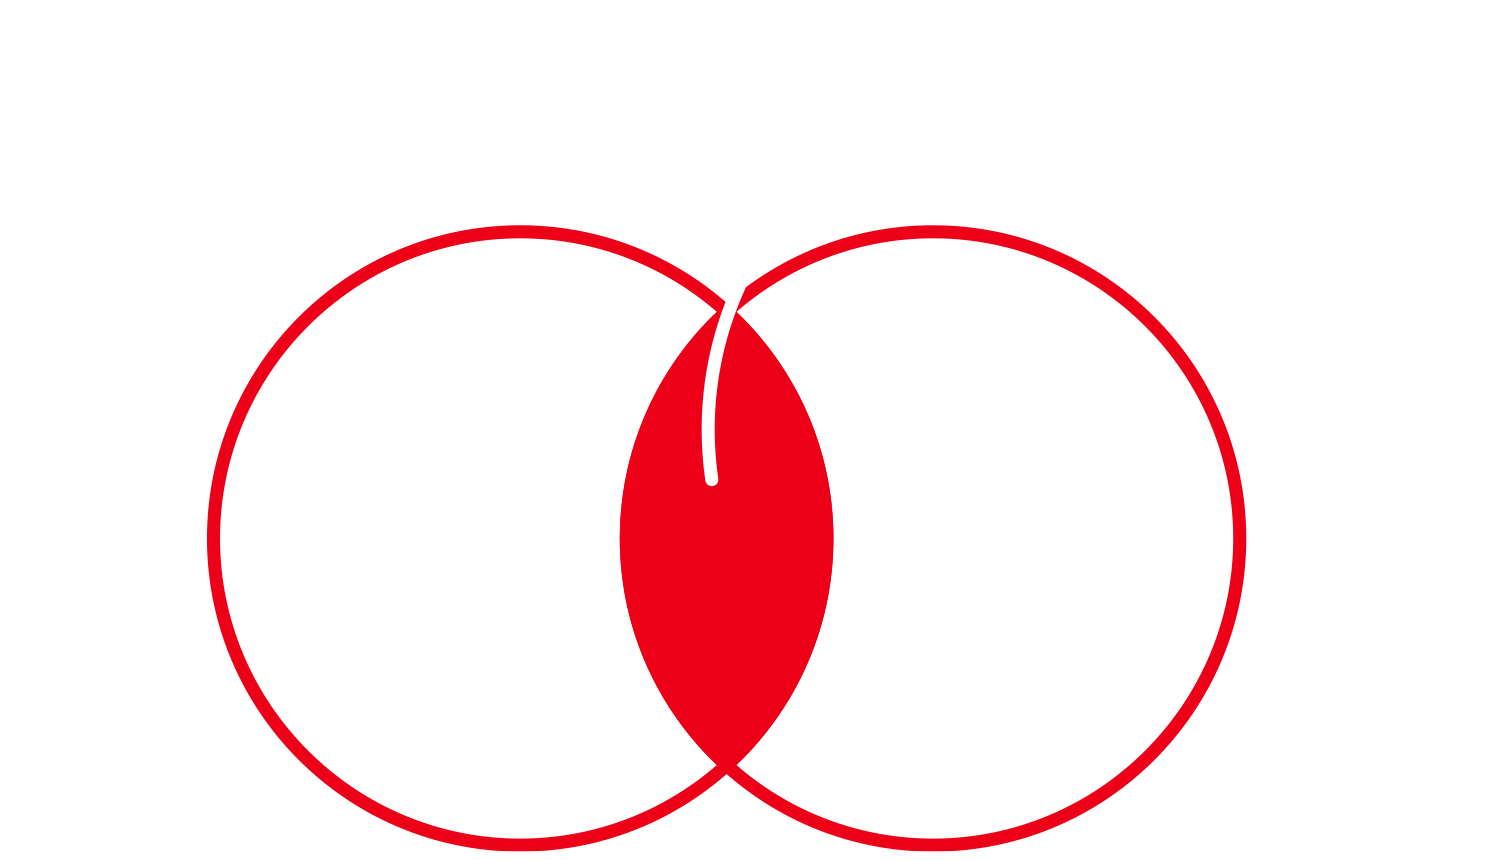 Figure 1: A Ven Diagram showing the intersection to build a business vision for a long-lasting company: personal aspirations and a cause for the greater good.